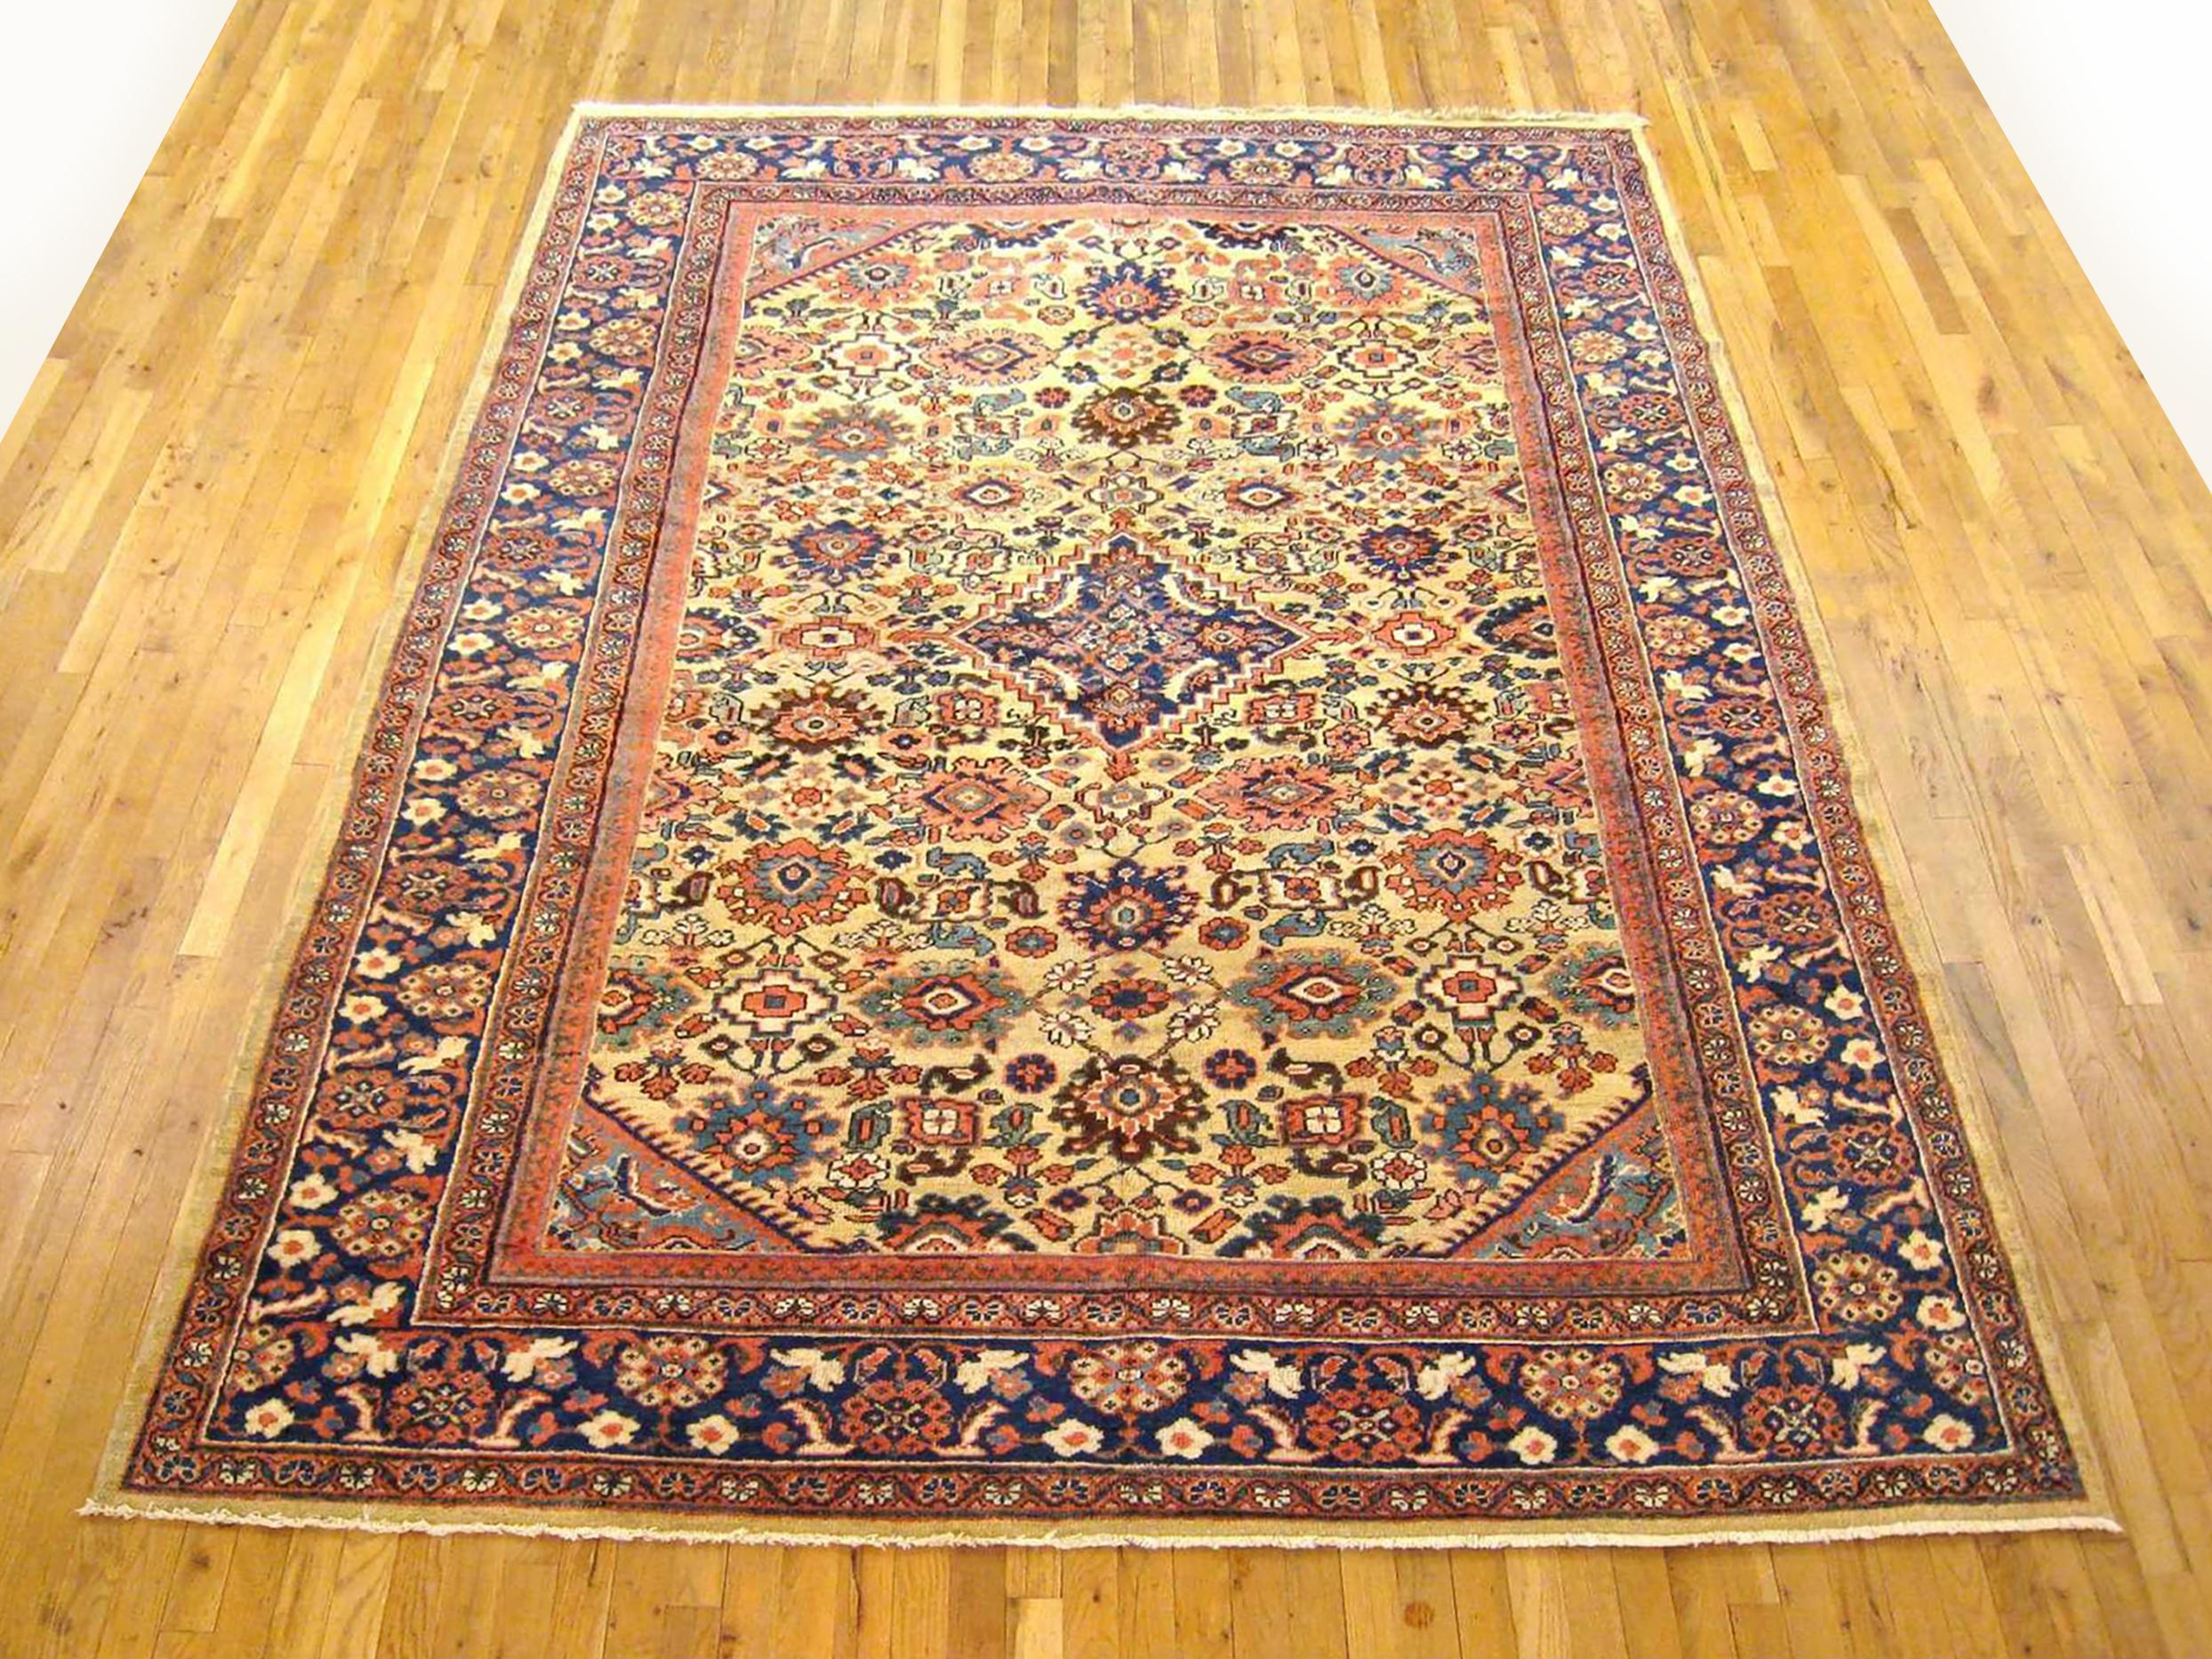 Antique Persian Sultanabad rug, Room size, circa 1920

A one-of-a-kind antique Persian Sultanabad oriental carpet, hand-knotted with short wool pile. This gorgeous hand-knotted wool rug features a central medallion on a gold primary field, with a